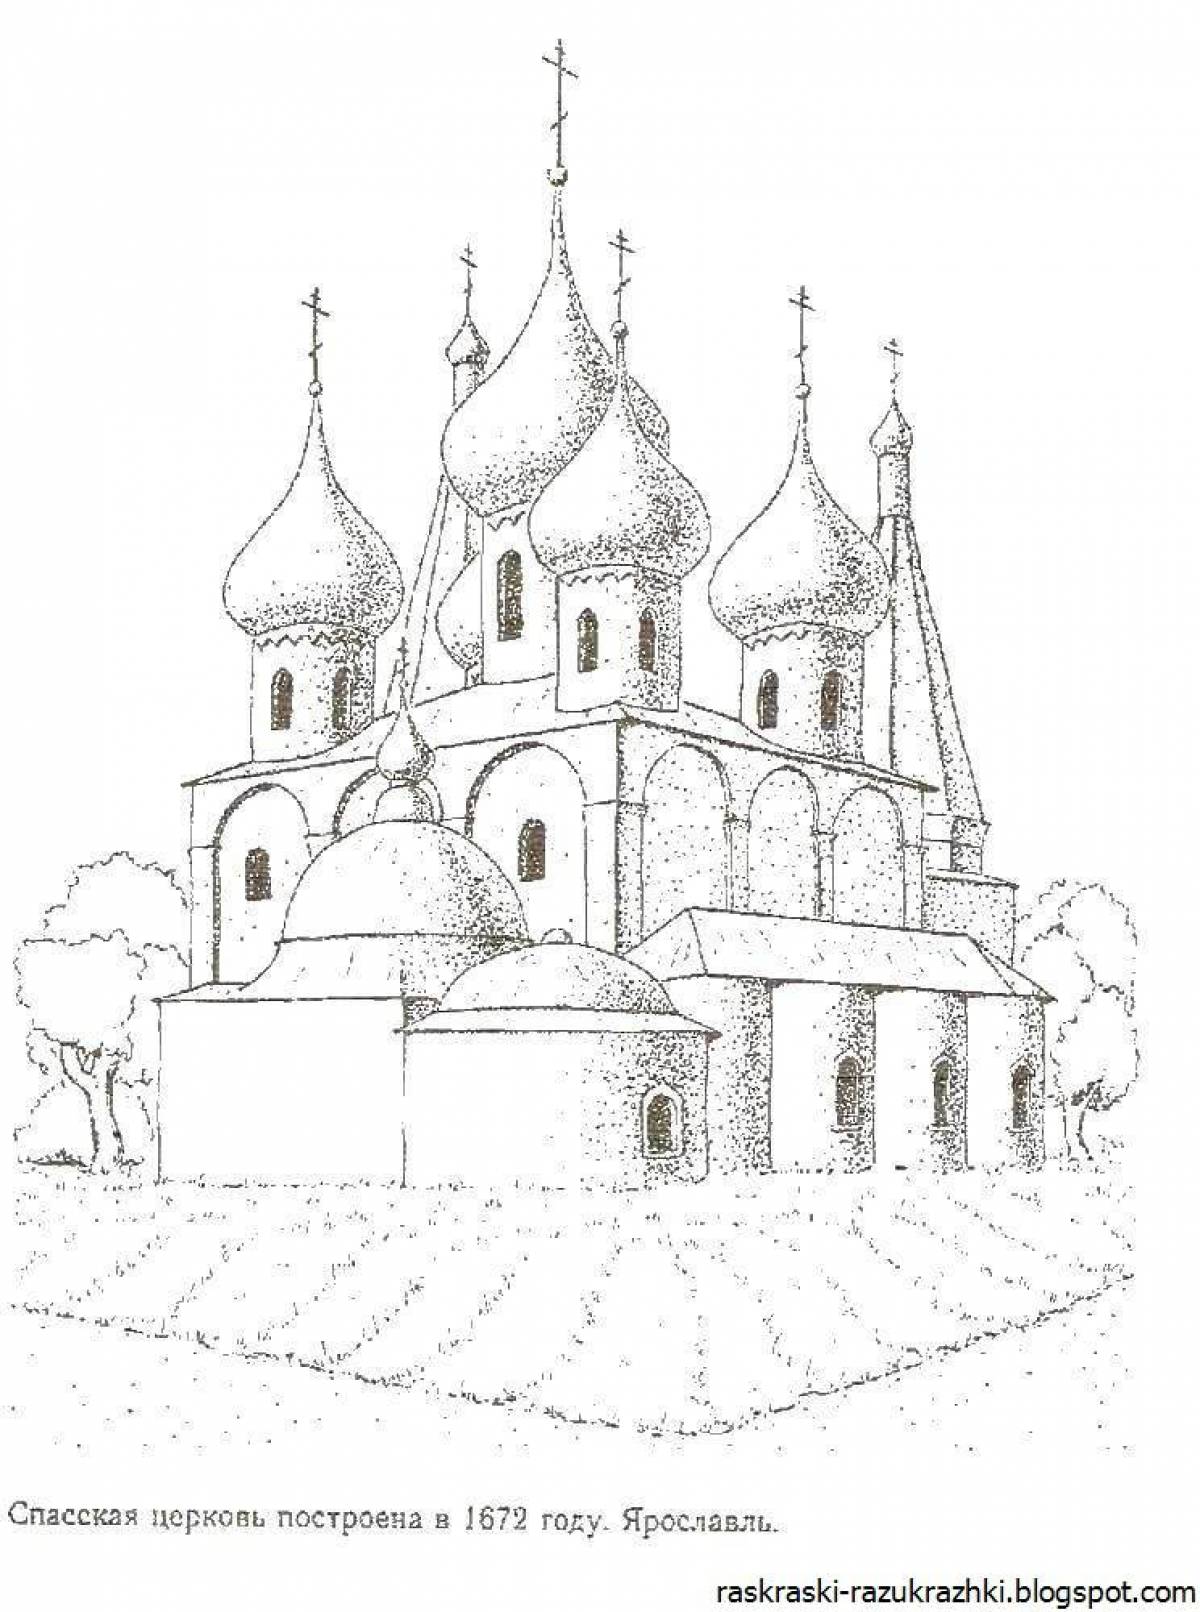 Charming church coloring page